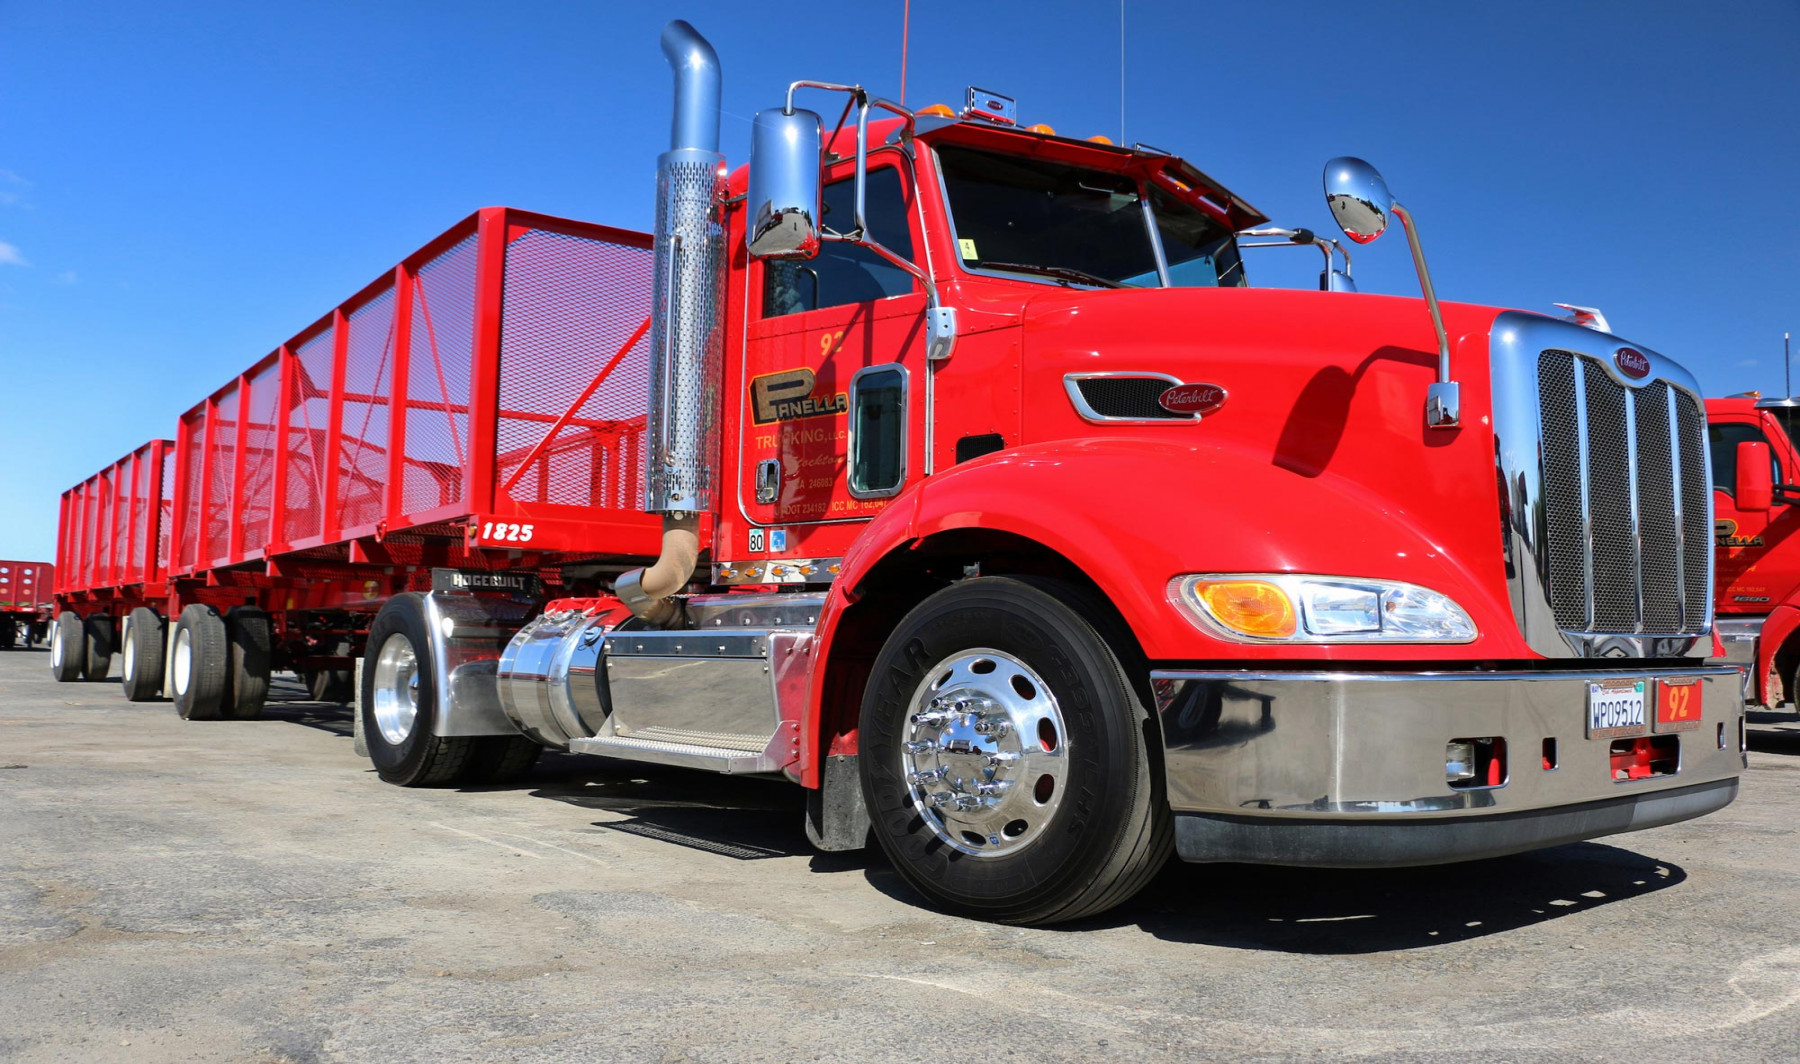 Truck Driving Jobs Stockton Ca - Truck Driving Jobs In Stockton, CA: Join The Transport Industry Now!